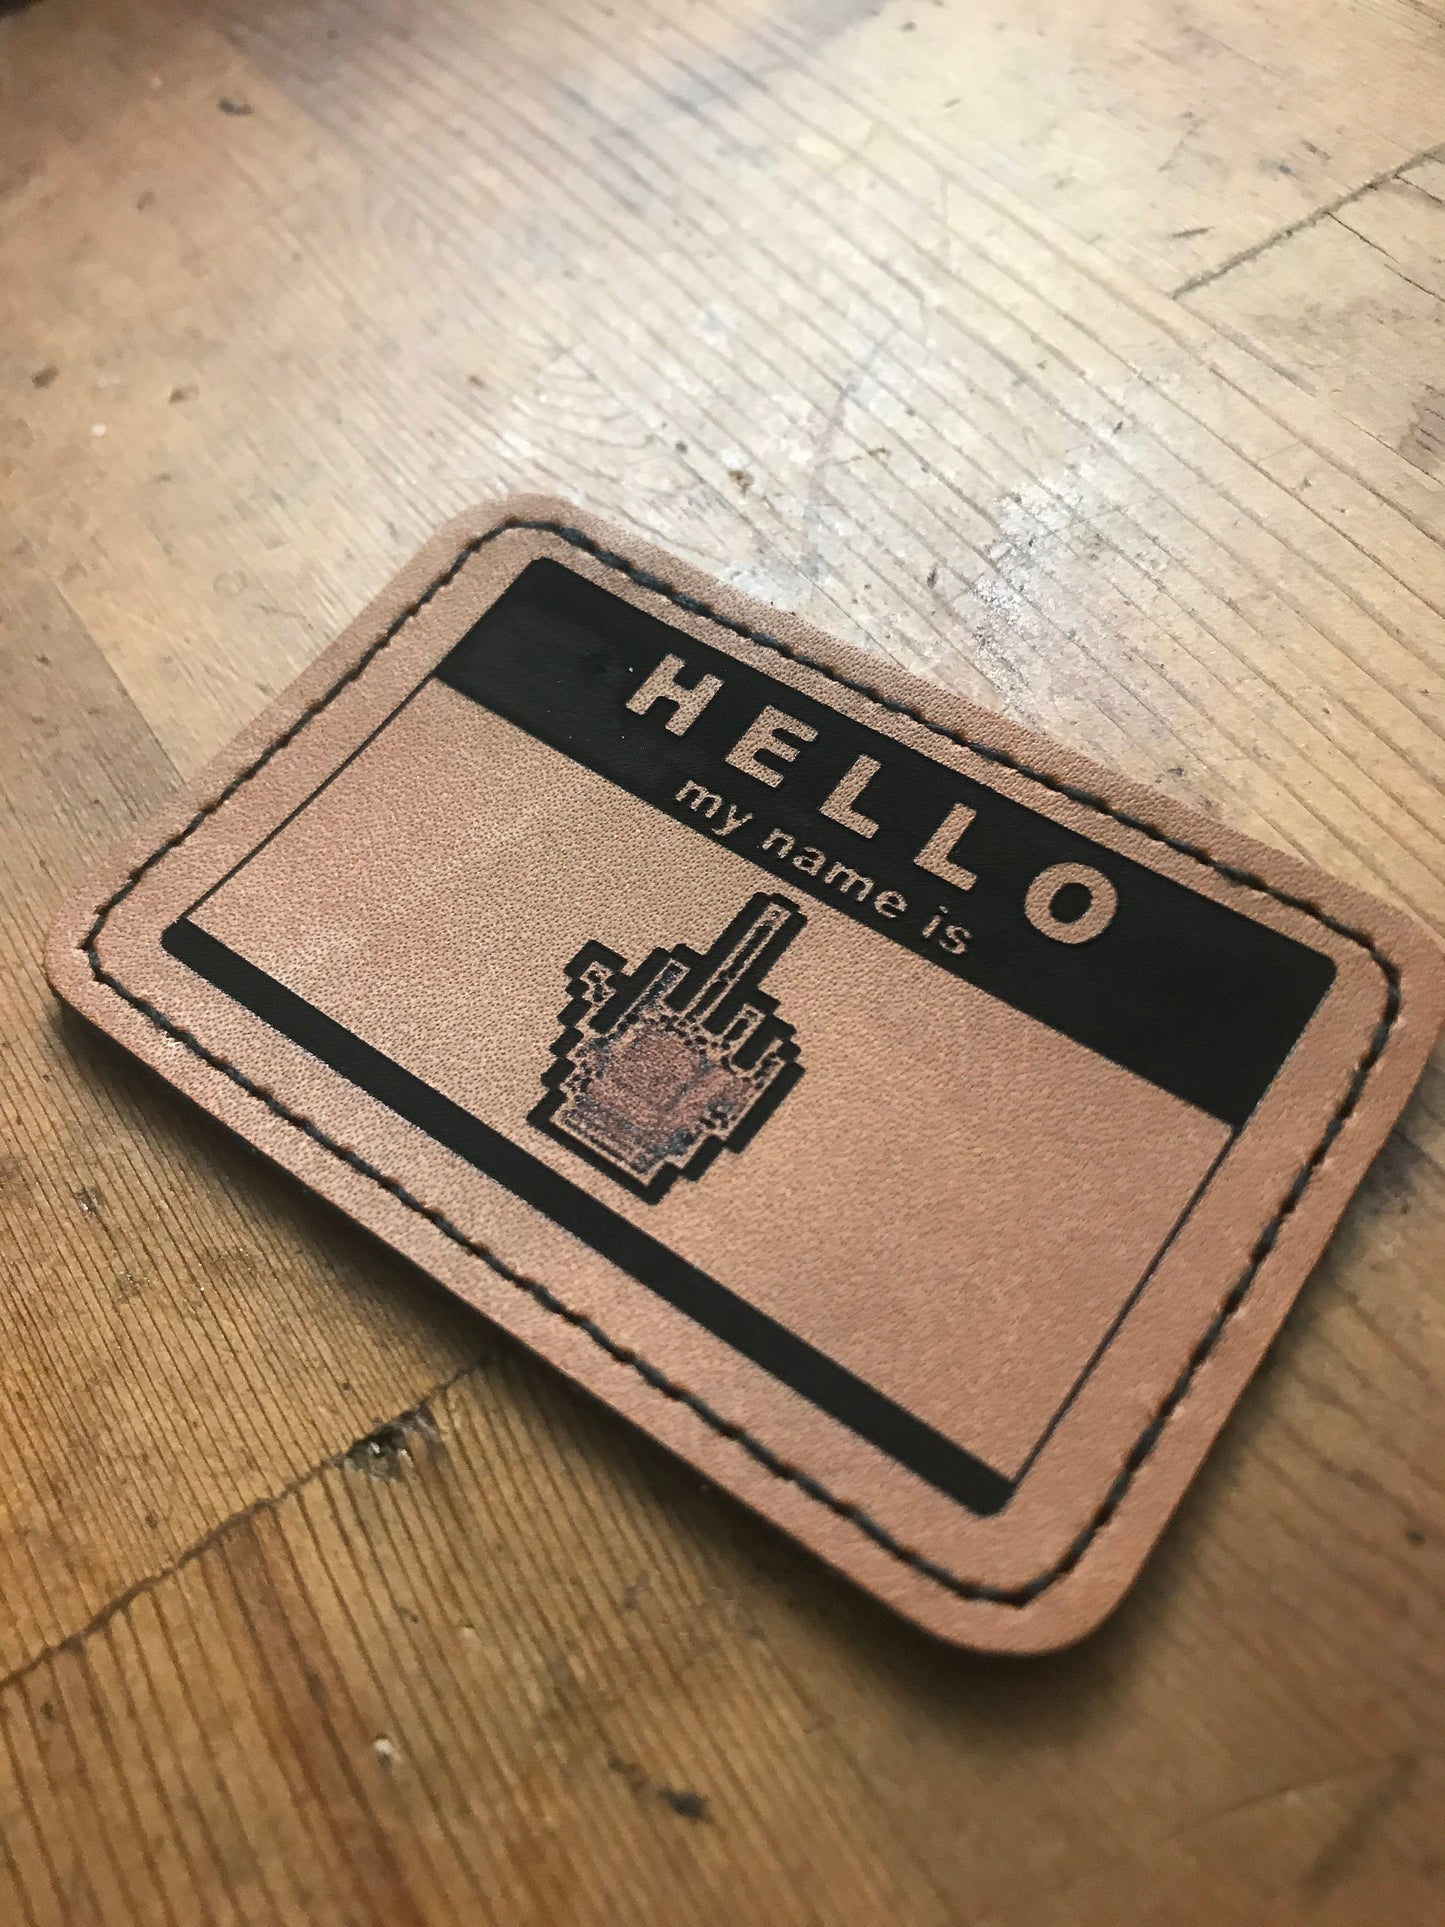 Asshole Name Tag, Leather Patch 3x2" Gag Gift, Middle Finger Hello My Name Is Joke Gifts for Grumpty Friends! Custom Leatherworking Silly